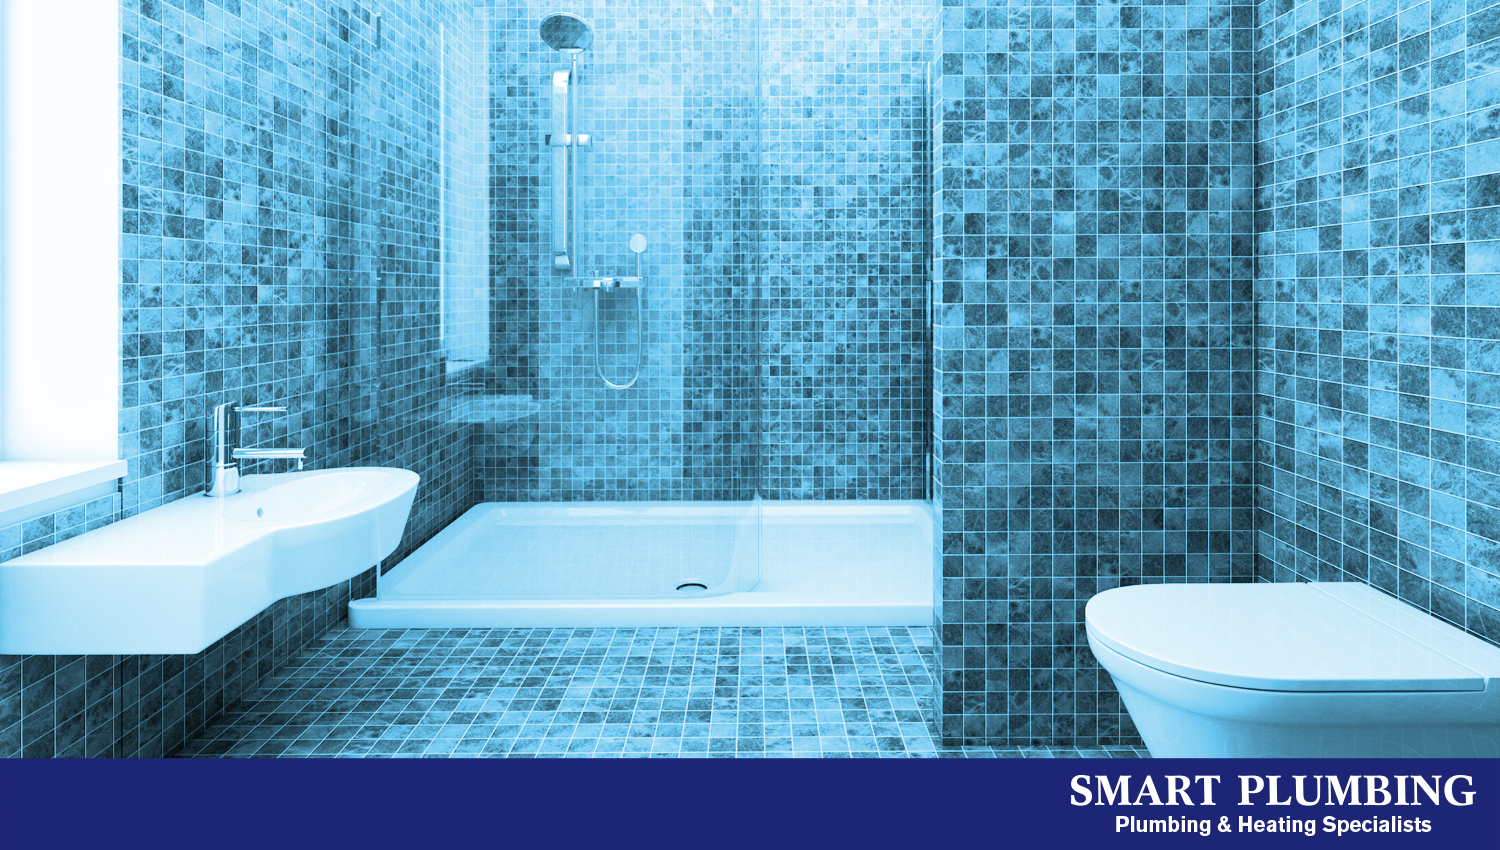 Smart Plumbing - Impeccably Finished Bathrooms